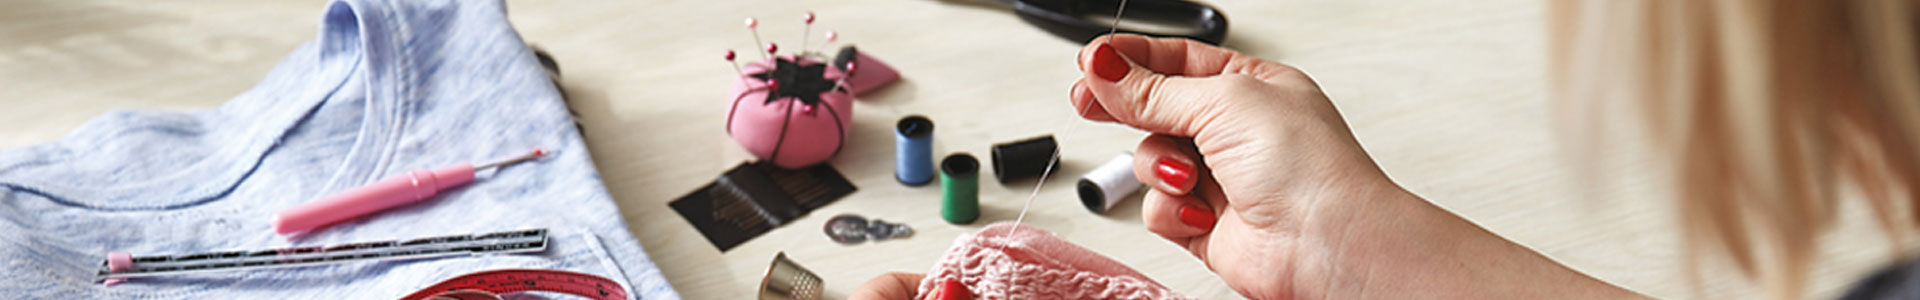 From sewing machines to sewing notions, we have everything you need for your next sewing project!